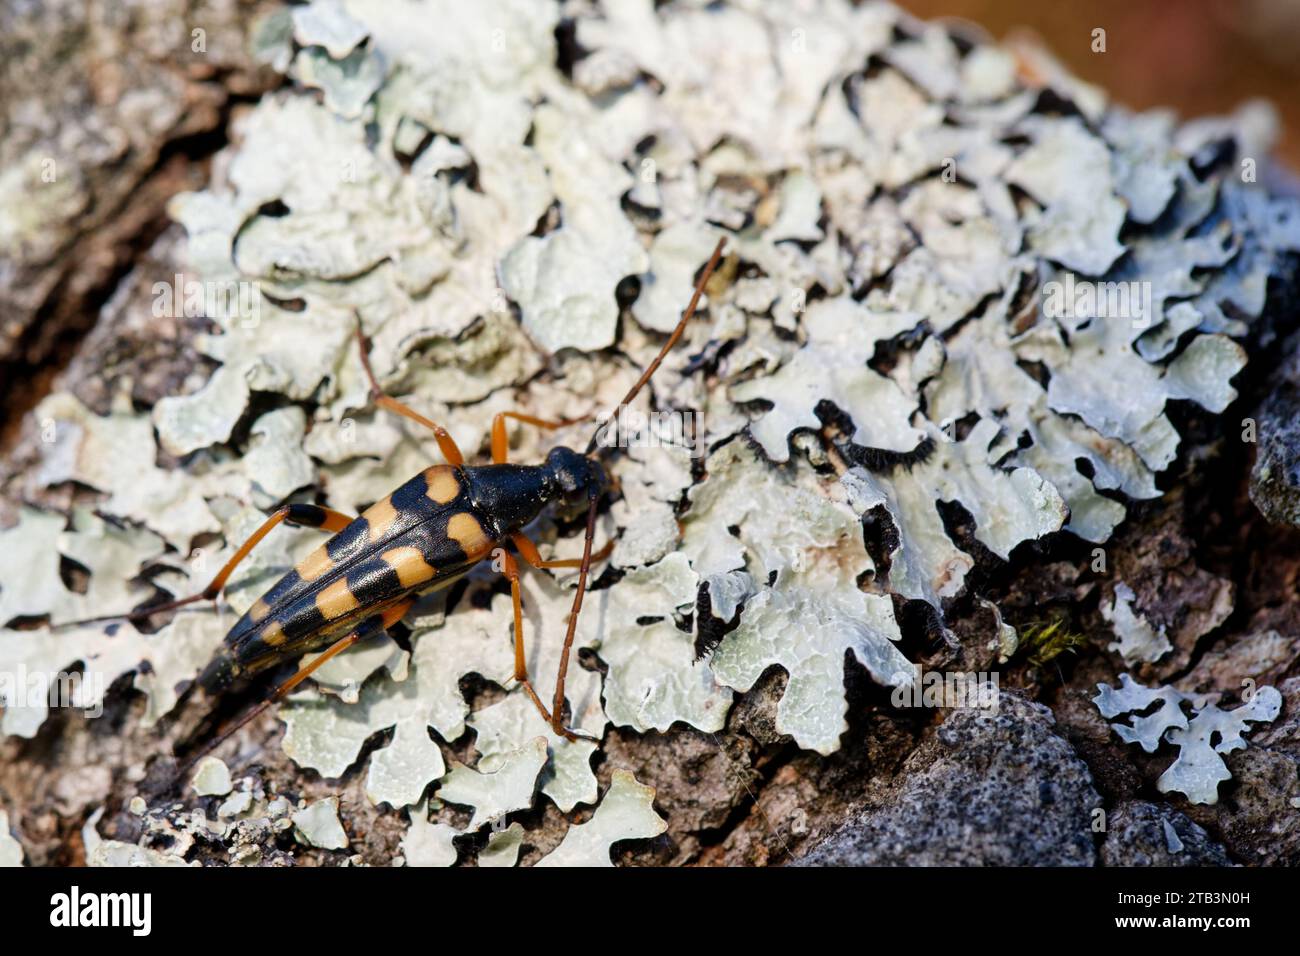 Longhorn beetle (Strangalia attenuata) only one population exist in wild Finland Stock Photo